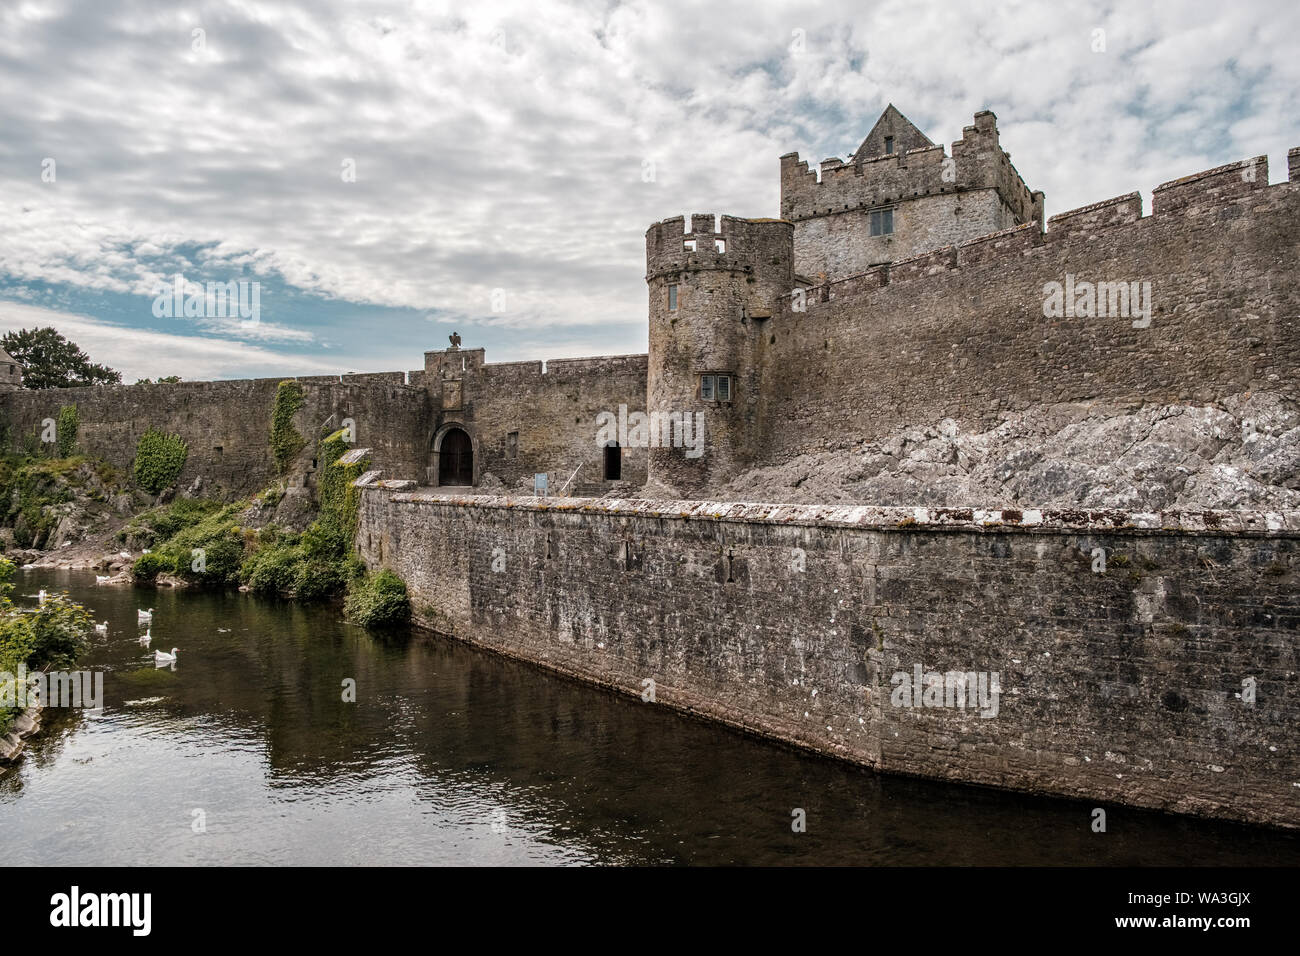 Cahir Castle, Cahir, County Tipperary, Ireland - 15th May 2019. Built in the 13th century, Cahir Castle is one of Ireland's largest castles and stands Stock Photo